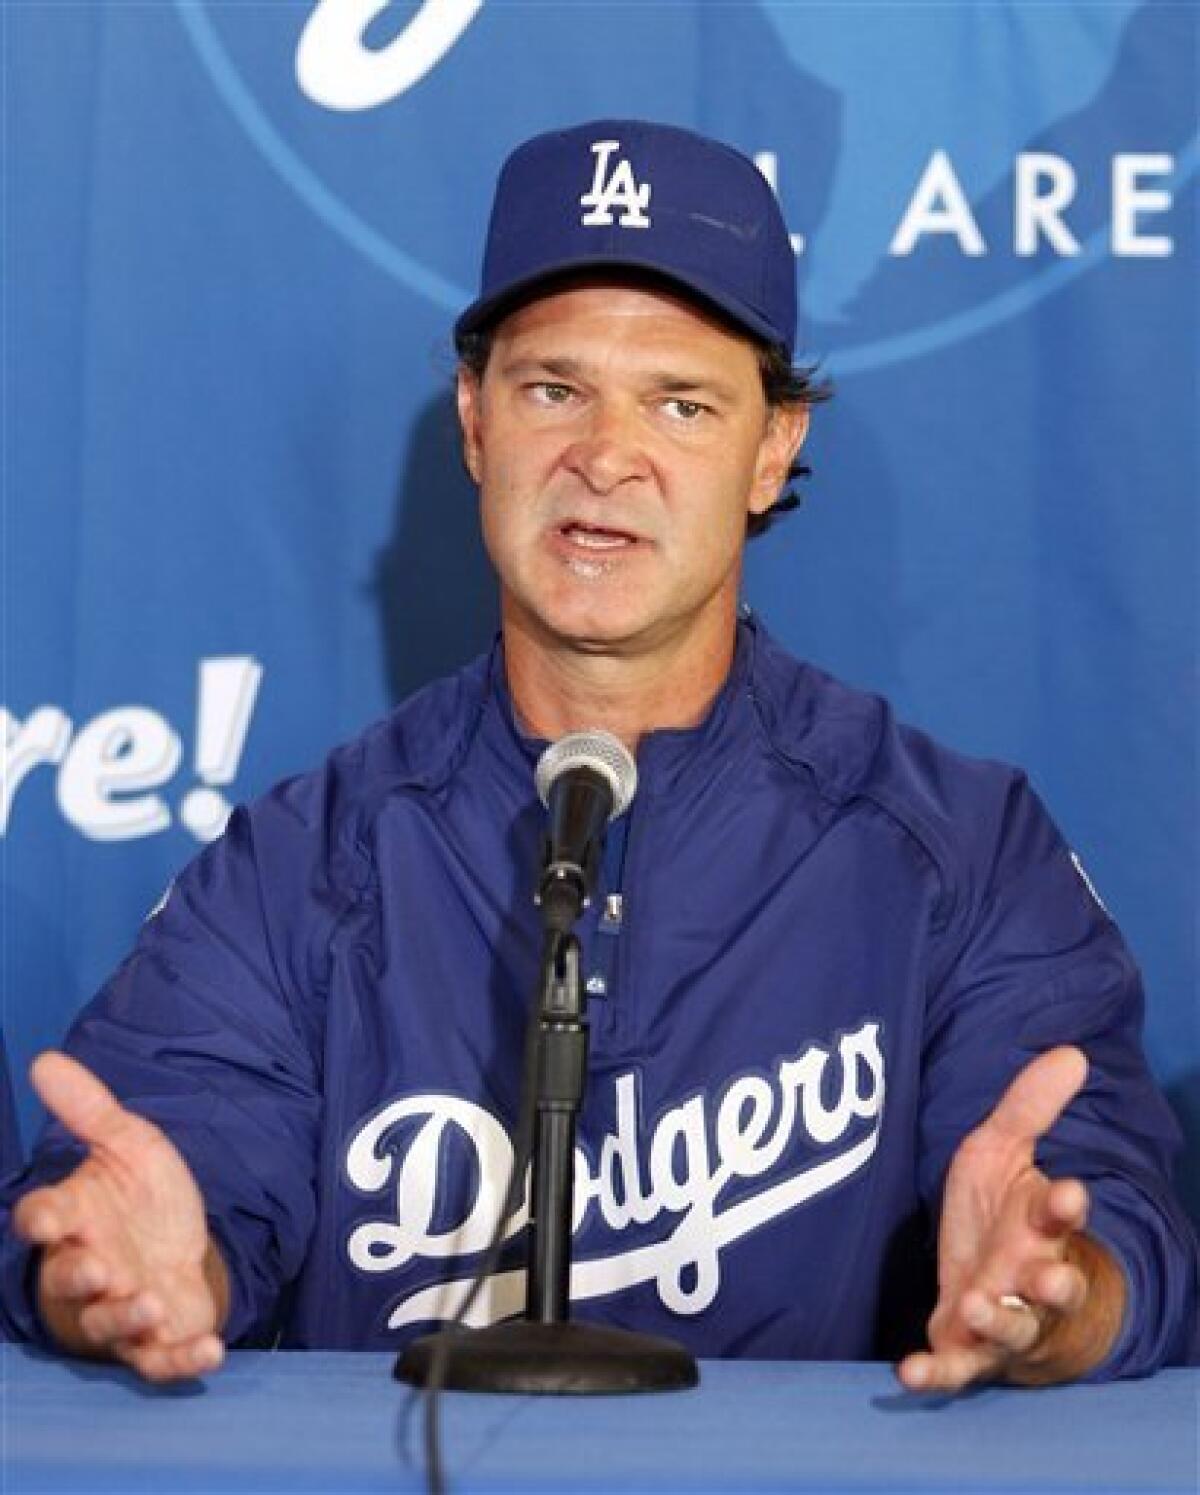 Don Mattingly to replace Joe Torre as Dodgers manager - Newsday